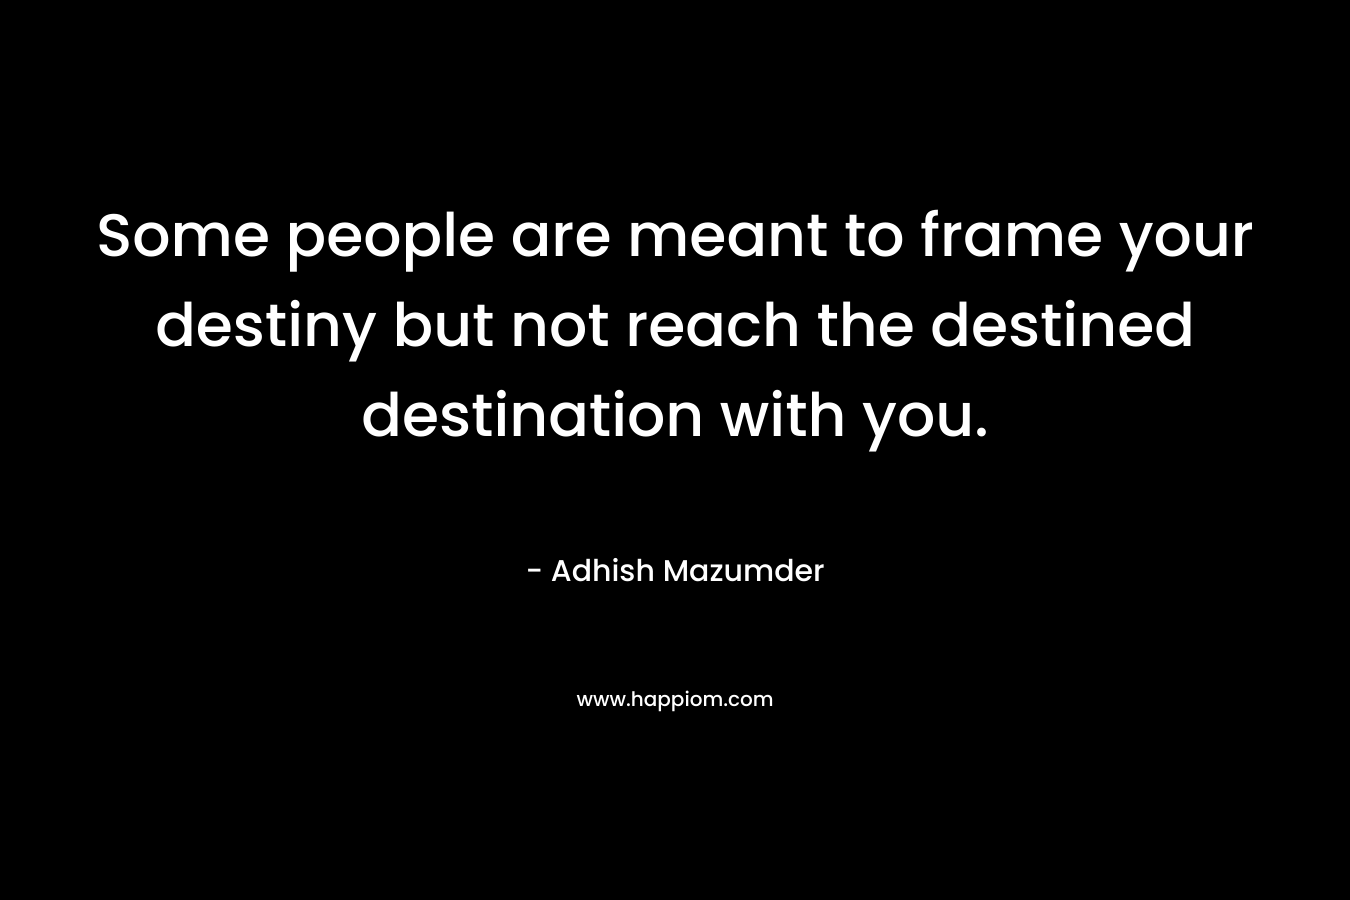 Some people are meant to frame your destiny but not reach the destined destination with you.